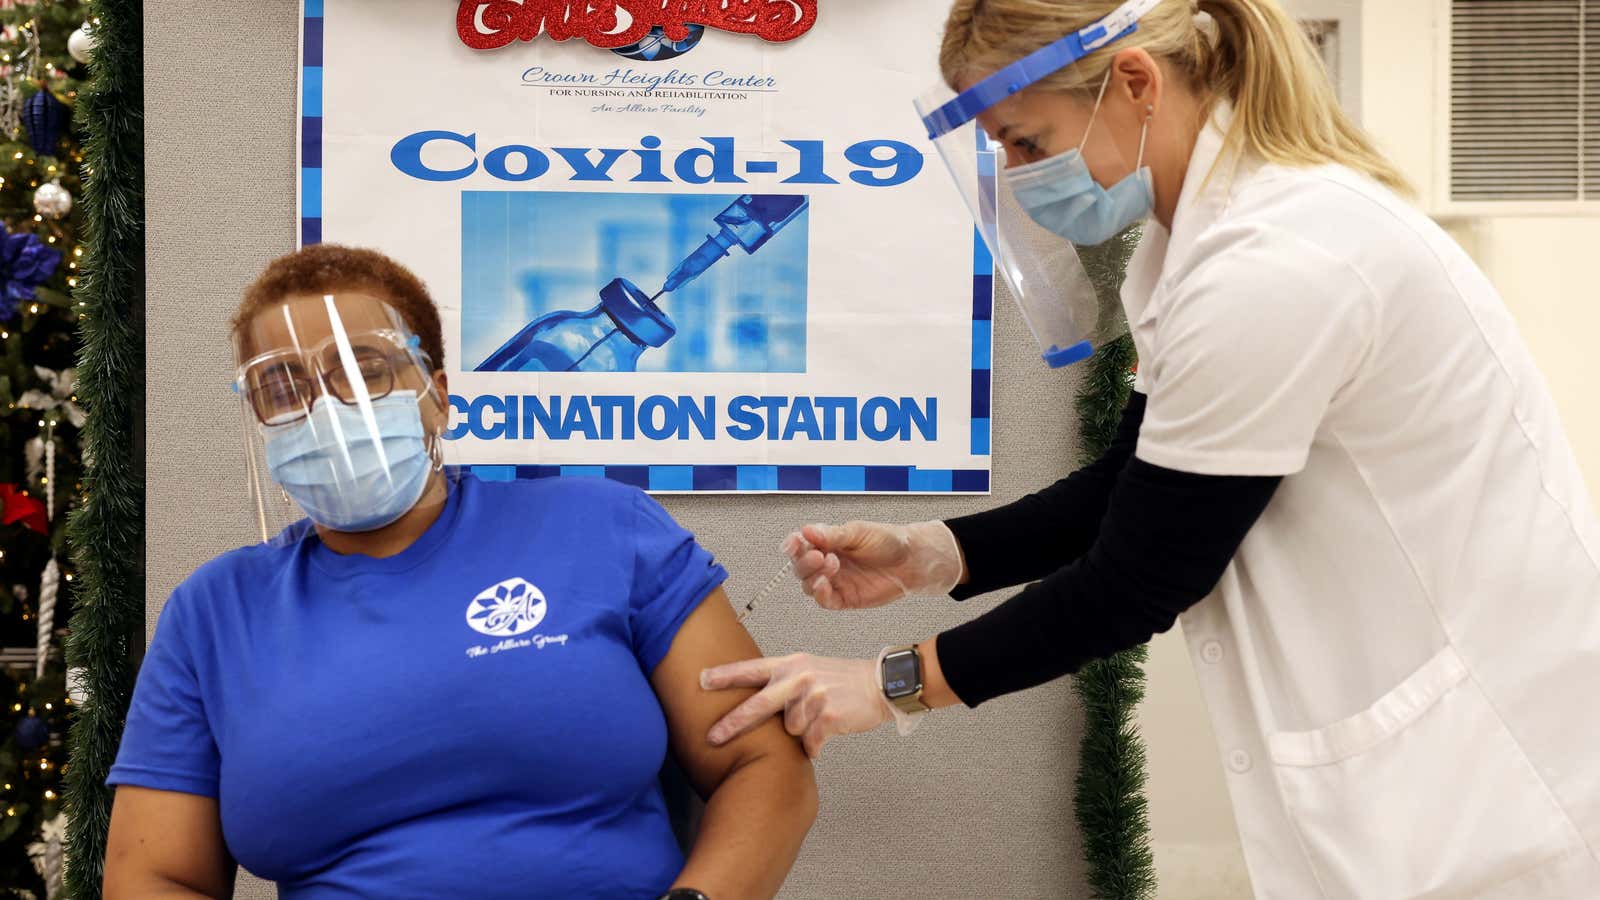 The US government has so far ordered enough Covid-19 vaccines to vaccinate 200 million people.